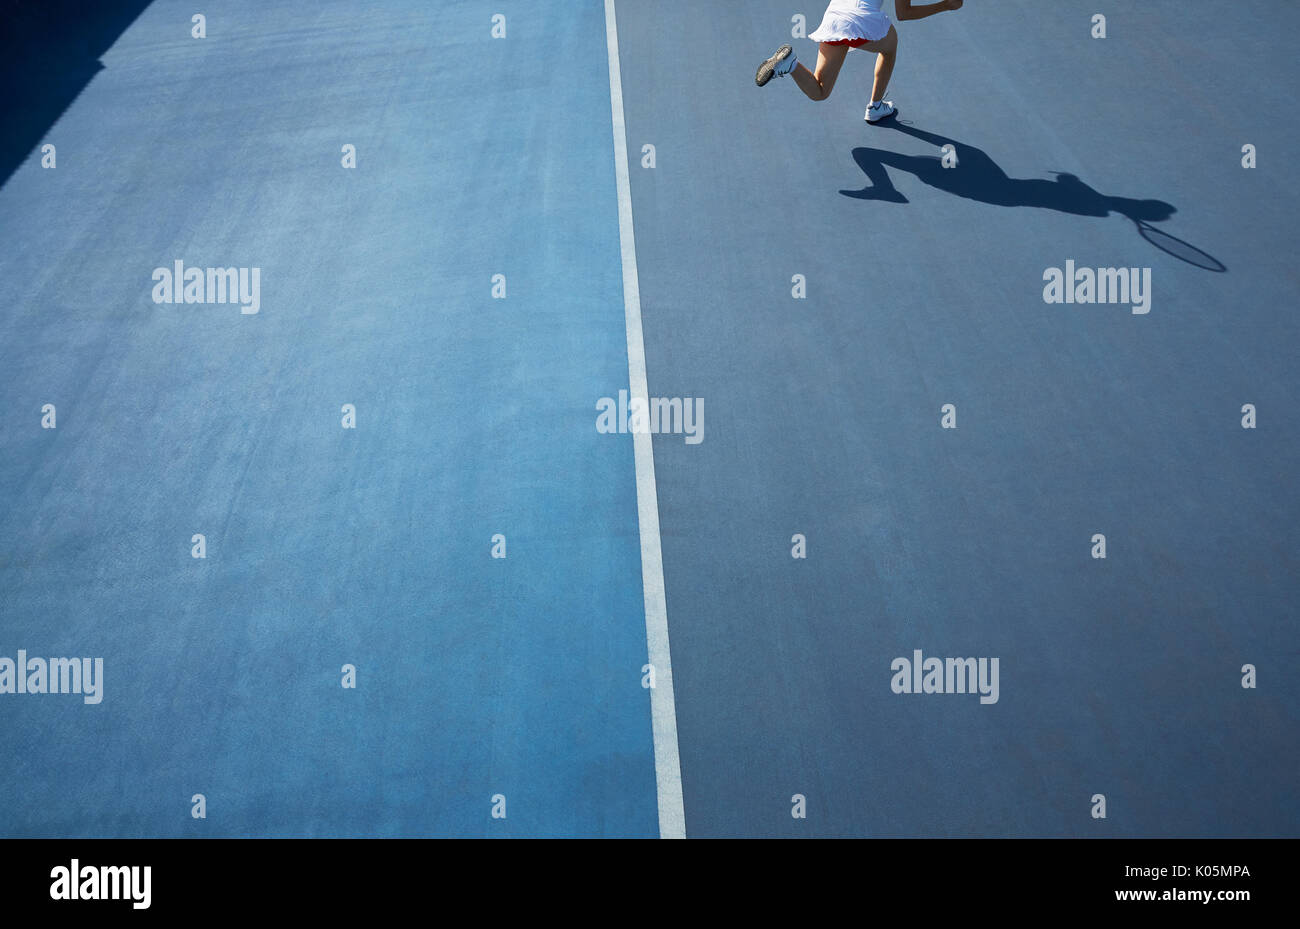 Shadow of female tennis player running on sunny blue tennis court Stock Photo